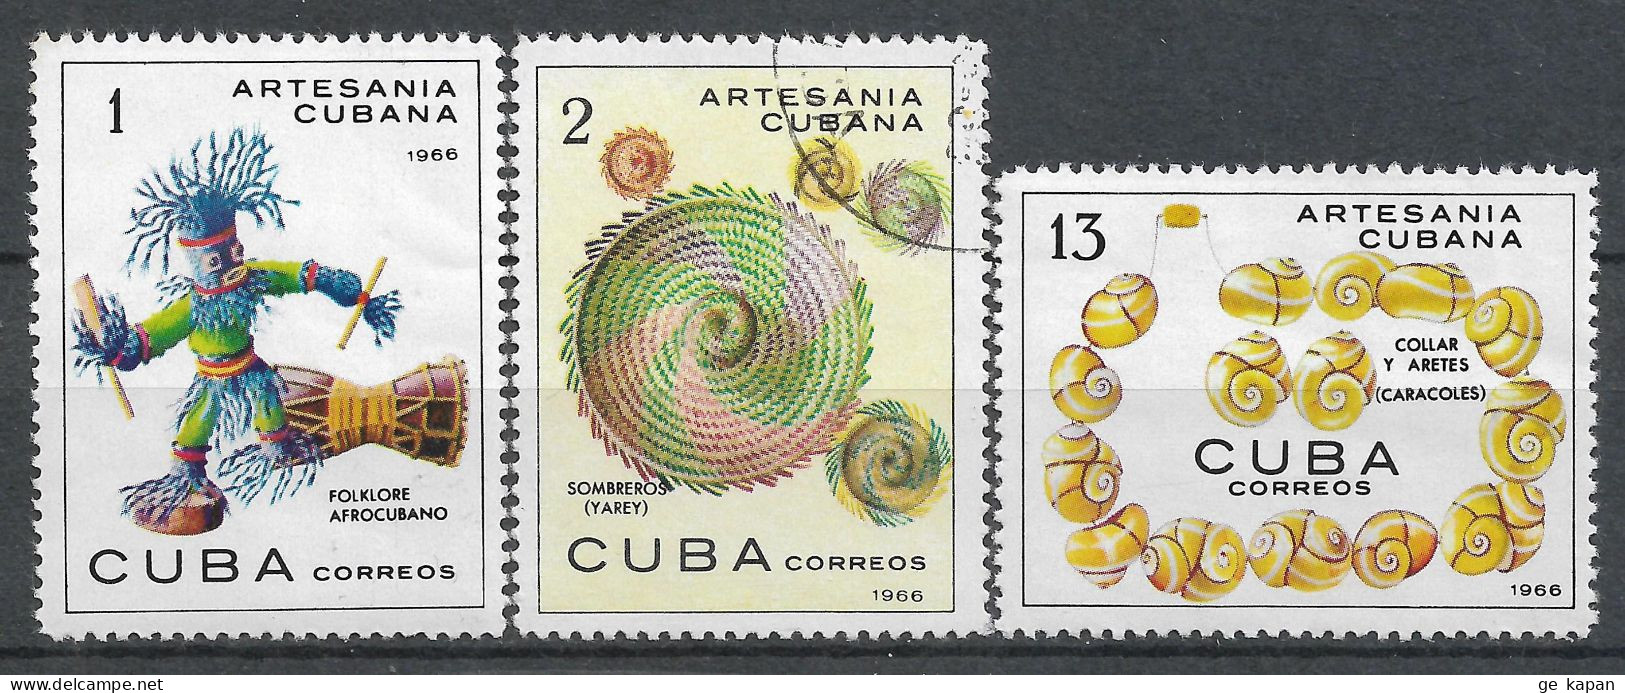 1966 CUBA SET OF 2 MNH + 1 USED STAMPS (Michel # 1142,1143,1148) CV €2.50 - Neufs